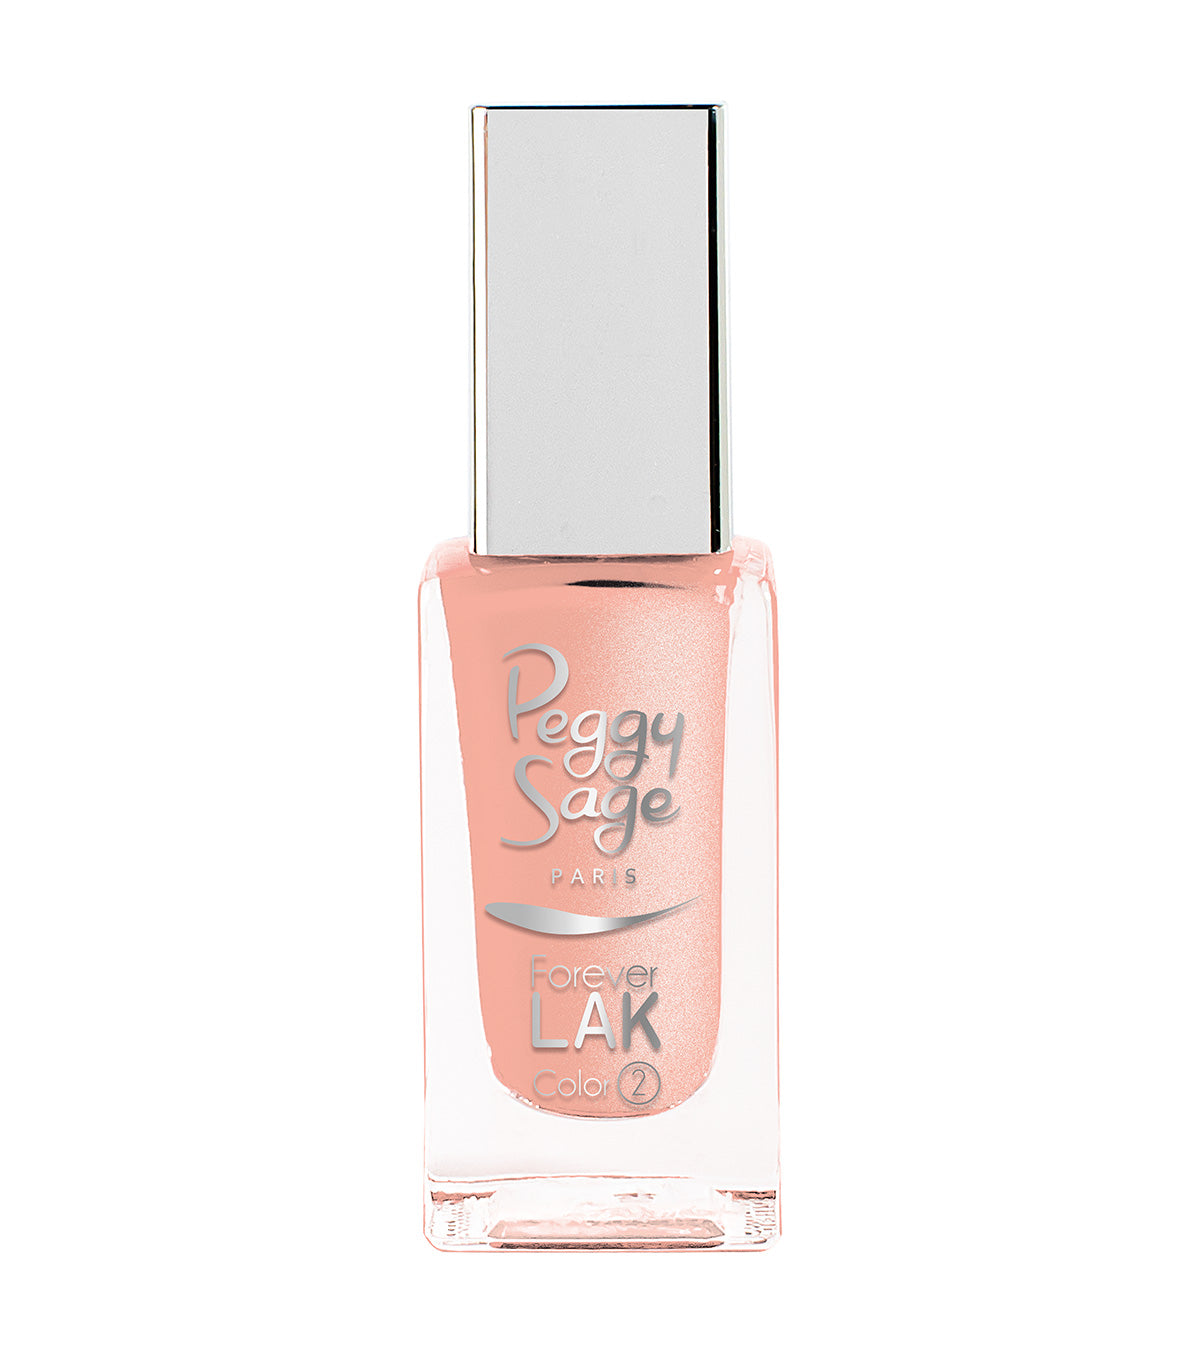 Peggy Sage Nail Lacquer Forever Lak Peach Sorbet 11ml